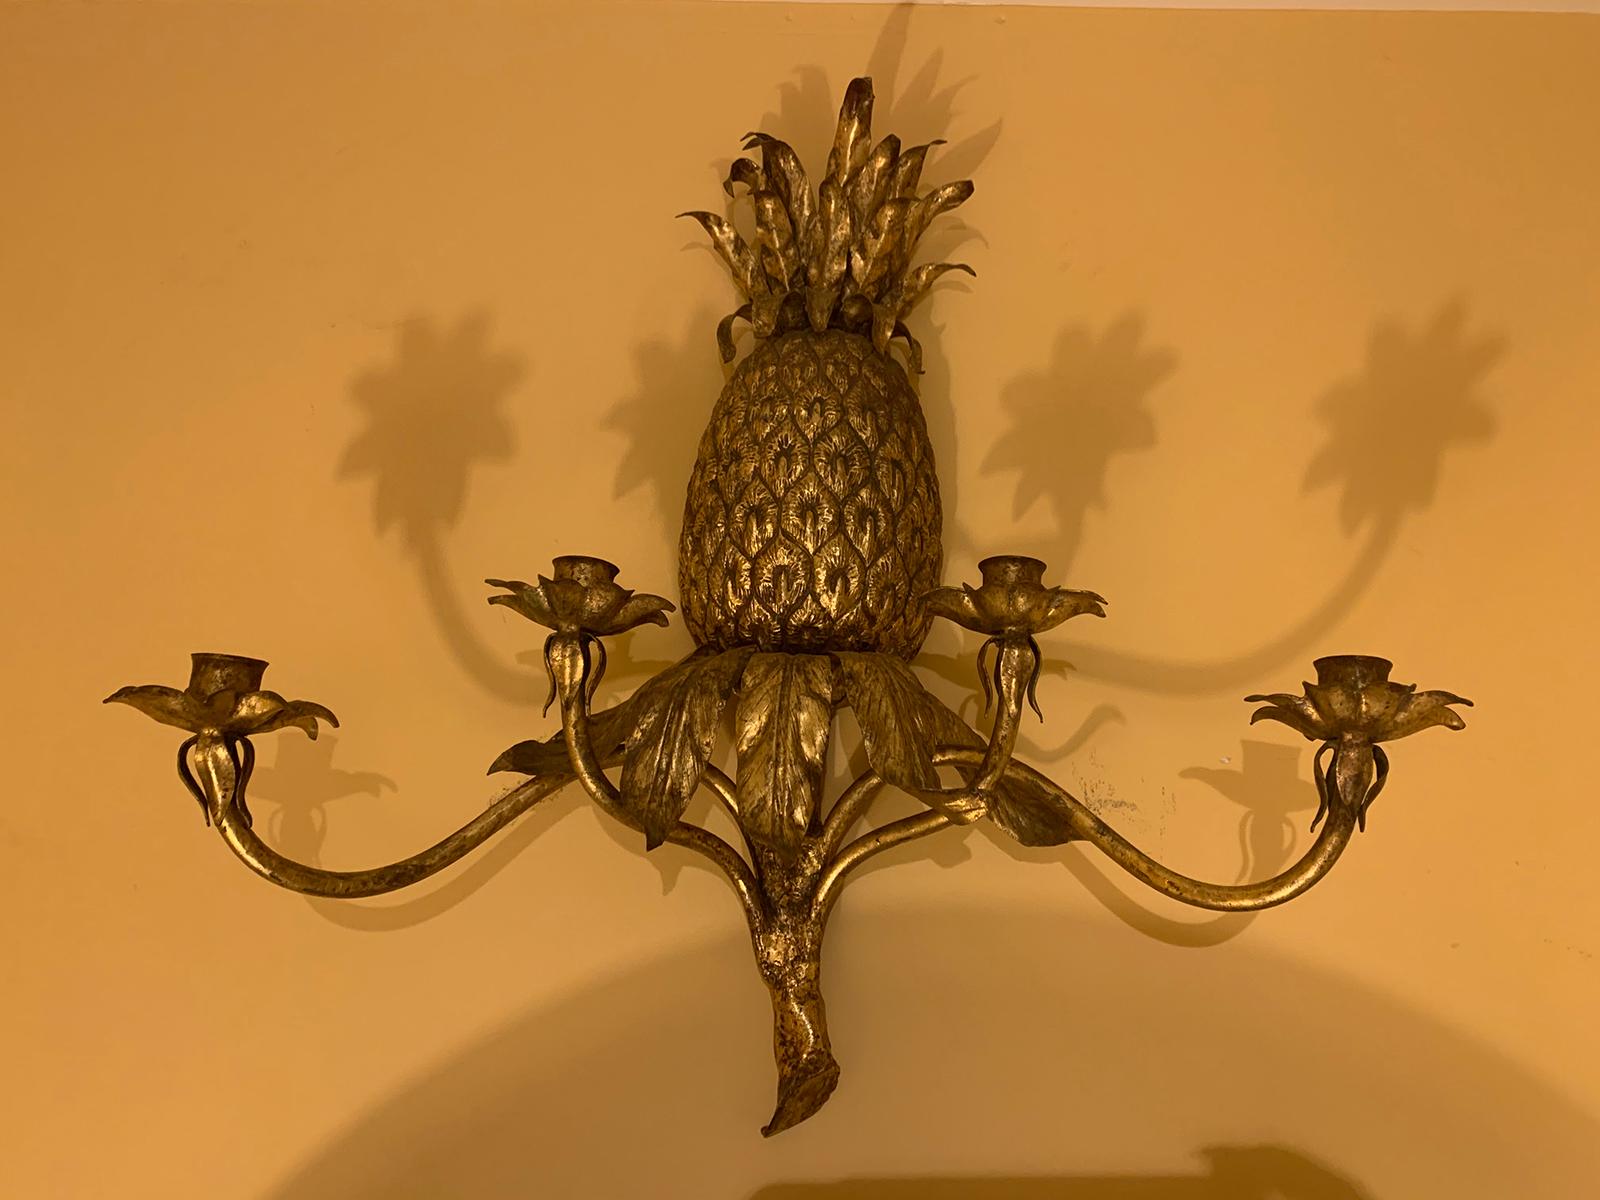 Mid-20th century gilt metal pineapple four-arm sconce
This is not wired, for decorative candles.